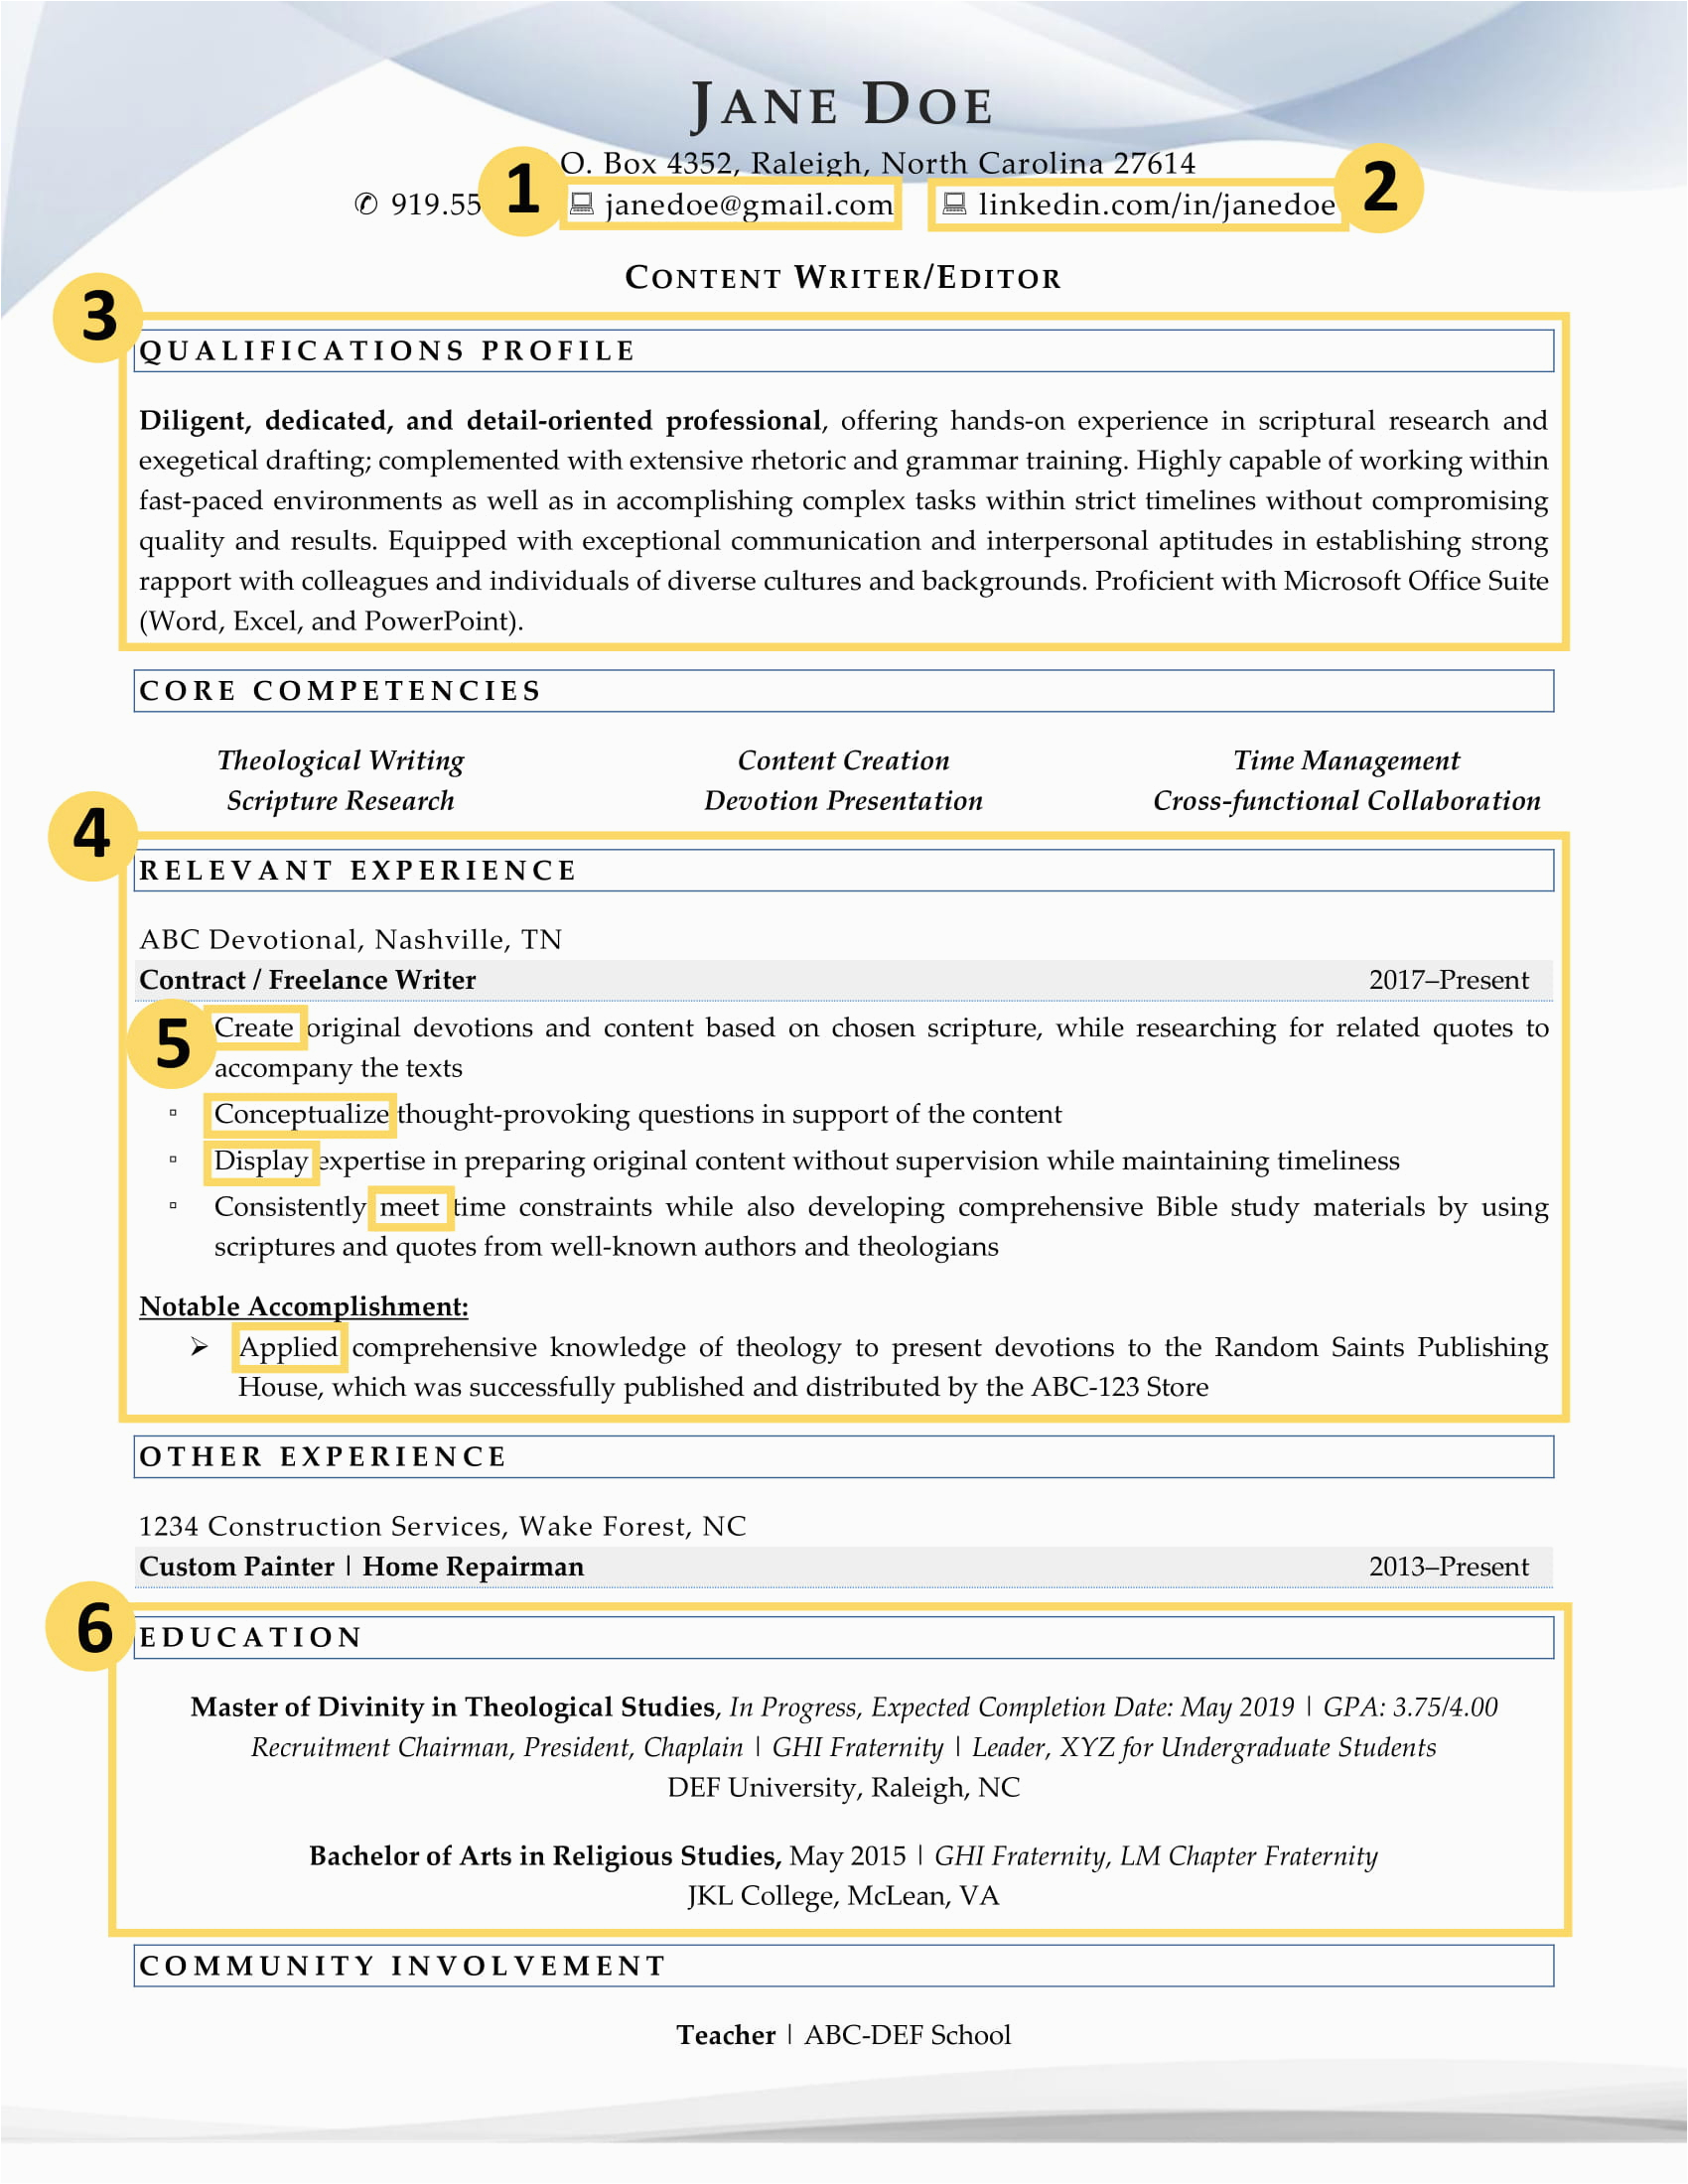 Resume for New College Graduate Template Recent College Graduate Resume Examples Mryn ism